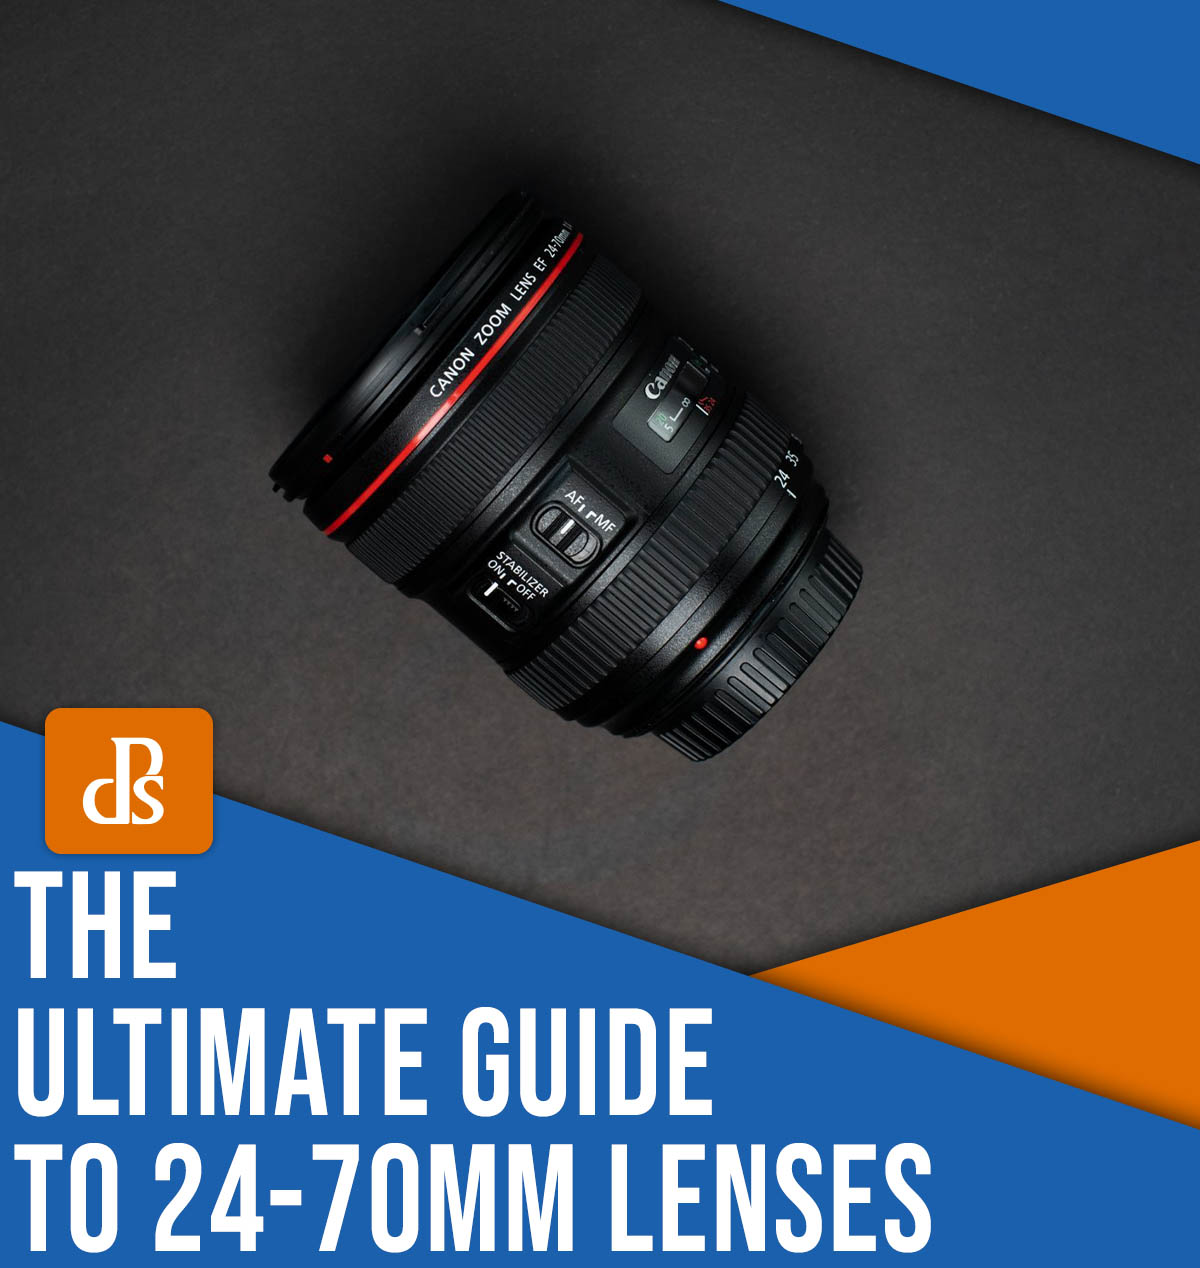 The ultimate guide to 24-70mm lenses